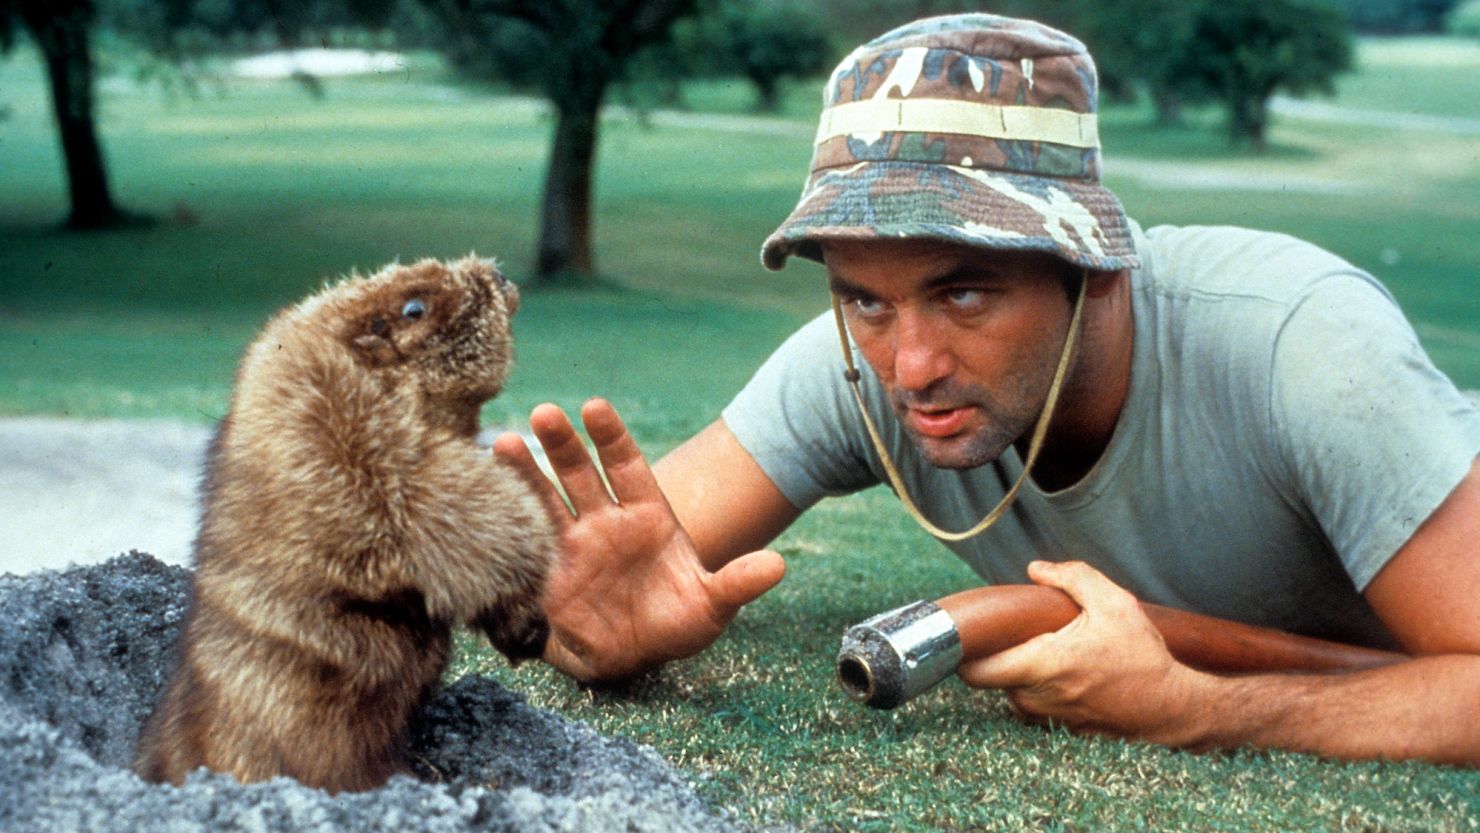 Bill Murray eye to eye with a gopher in a scene from the film, 'Caddyshack.'